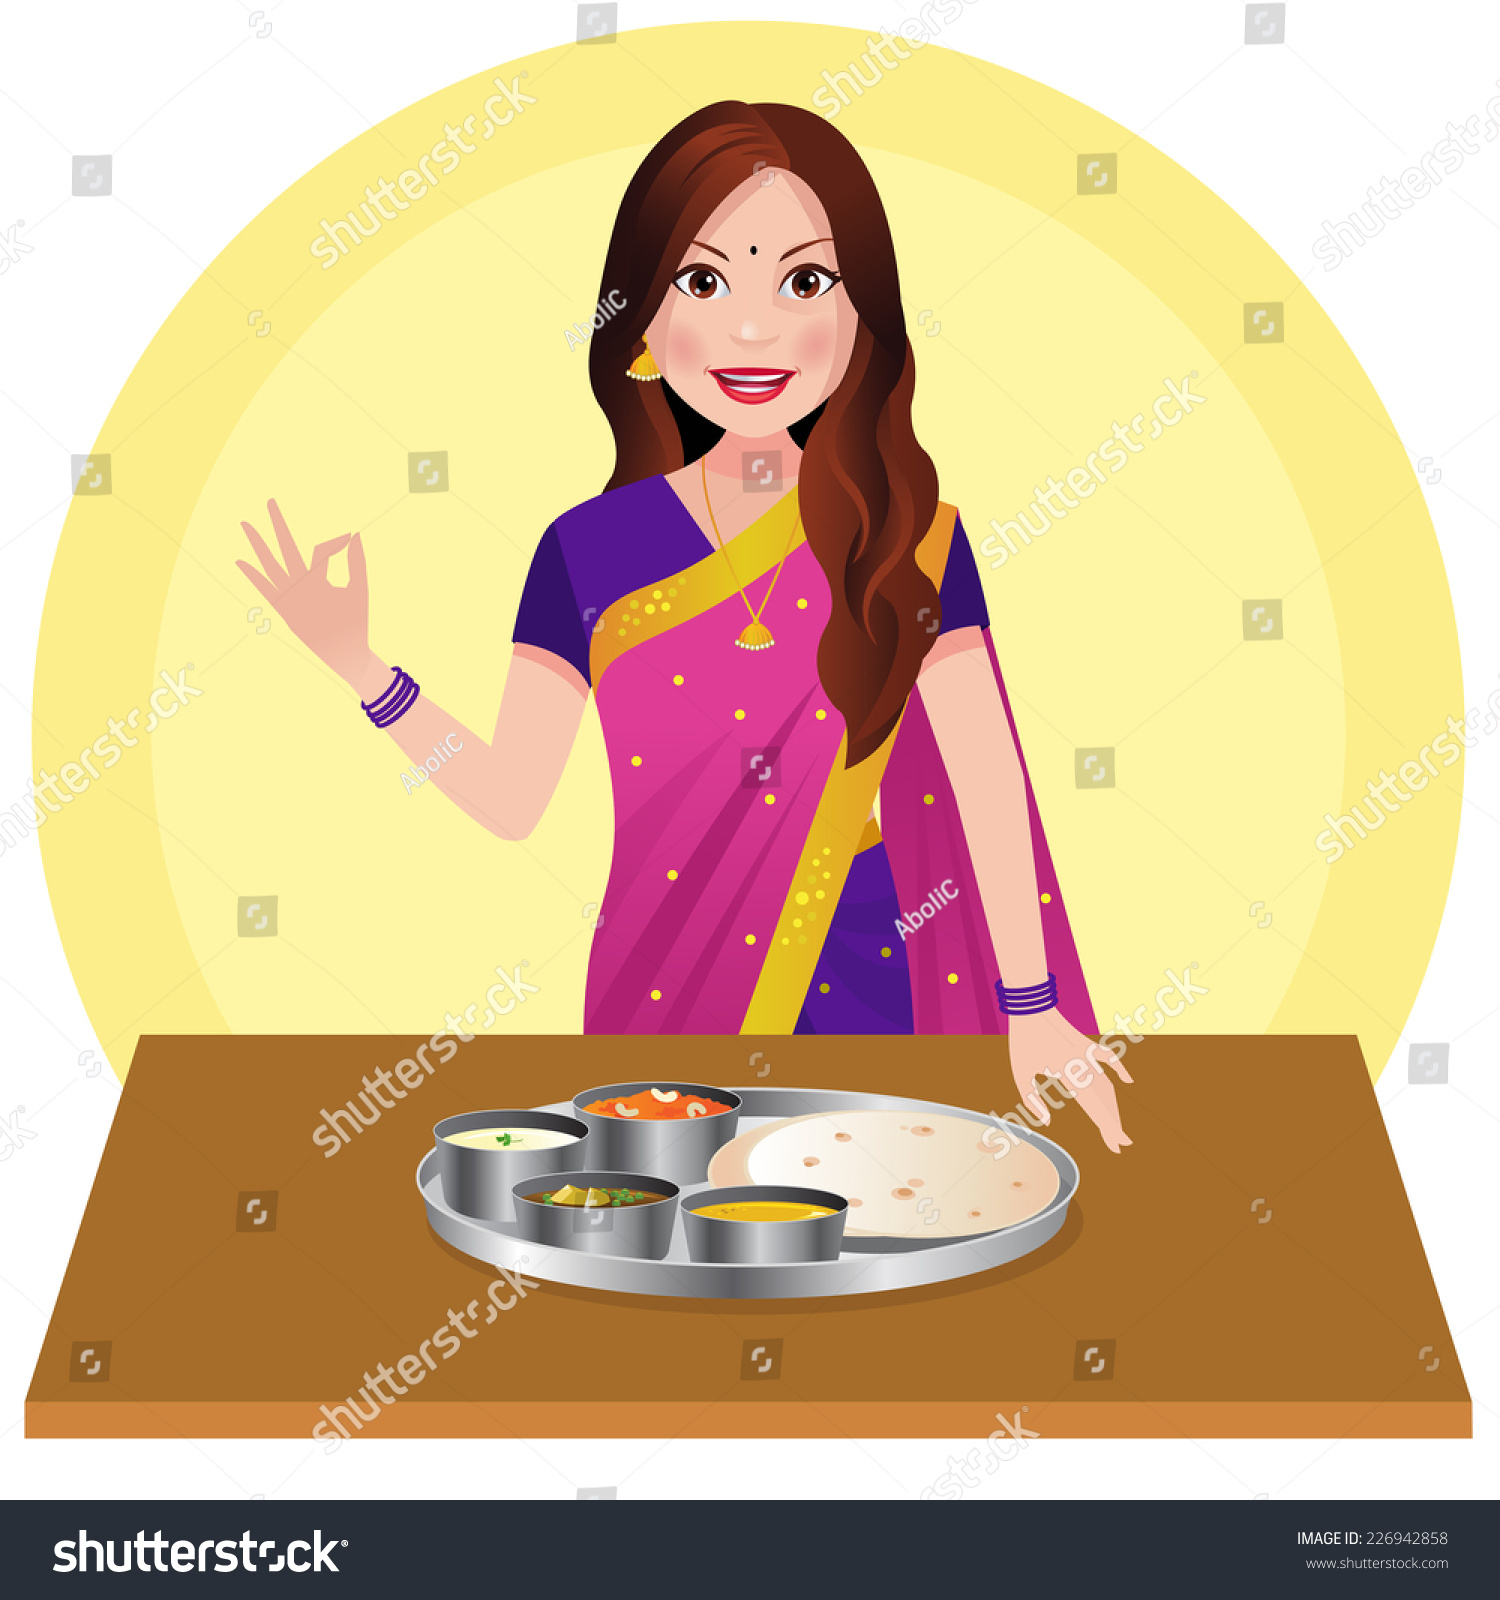 clipart woman cooking food - photo #44